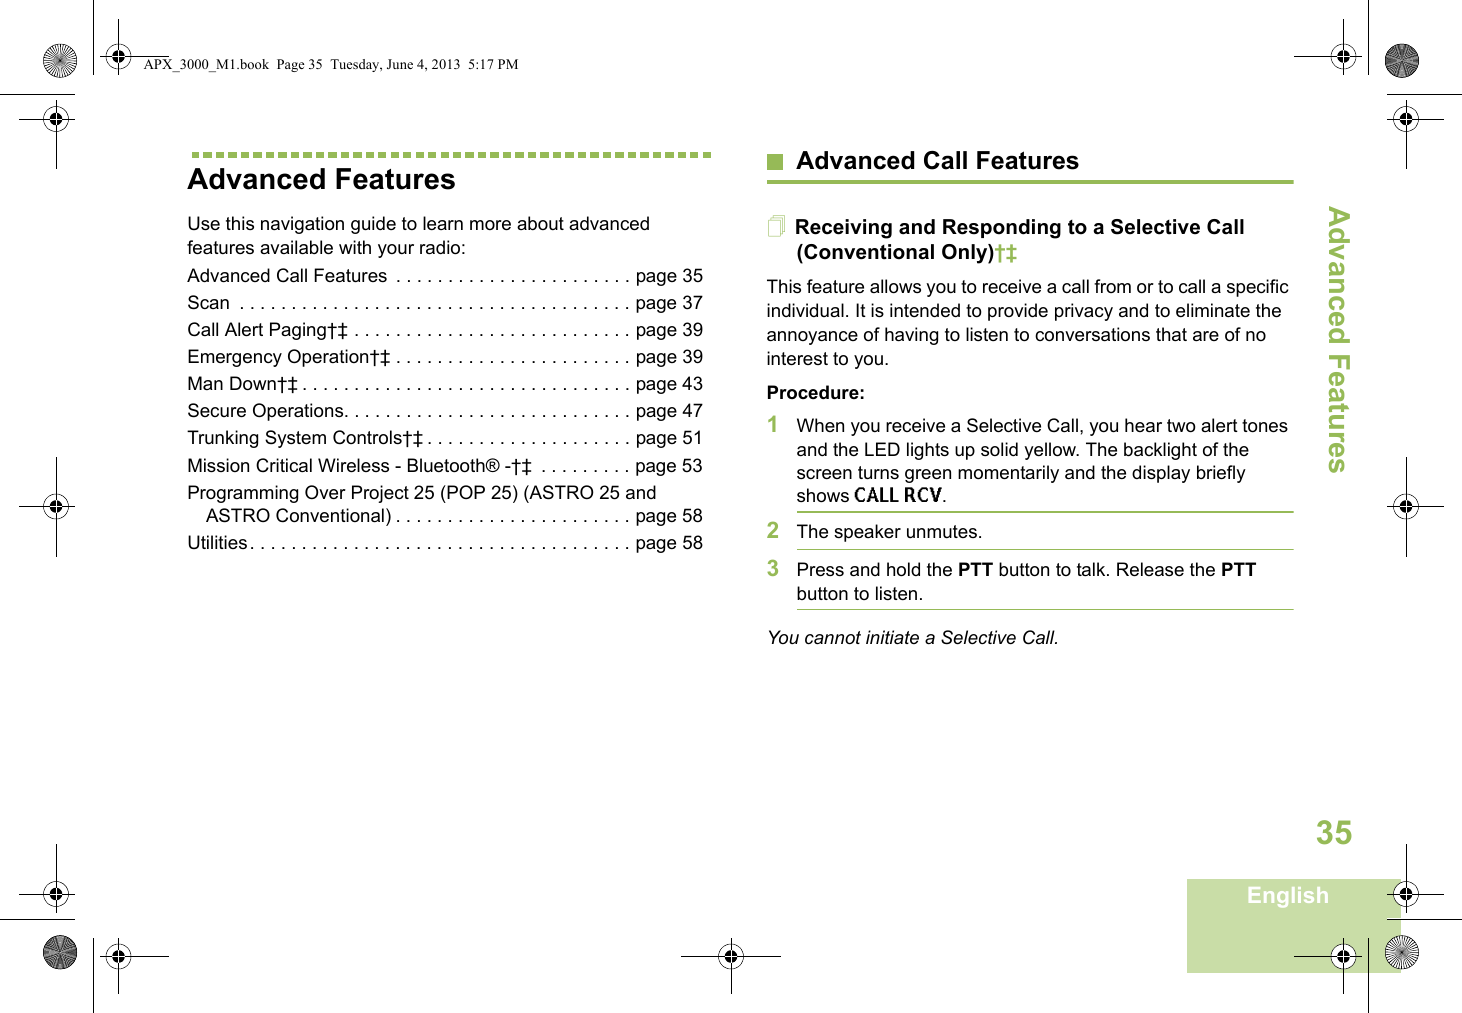 Advanced FeaturesEnglish35Advanced FeaturesUse this navigation guide to learn more about advanced features available with your radio:Advanced Call Features  . . . . . . . . . . . . . . . . . . . . . . . page 35Scan  . . . . . . . . . . . . . . . . . . . . . . . . . . . . . . . . . . . . . . page 37Call Alert Paging†‡ . . . . . . . . . . . . . . . . . . . . . . . . . . . page 39Emergency Operation†‡ . . . . . . . . . . . . . . . . . . . . . . . page 39Man Down†‡ . . . . . . . . . . . . . . . . . . . . . . . . . . . . . . . . page 43Secure Operations. . . . . . . . . . . . . . . . . . . . . . . . . . . . page 47Trunking System Controls†‡ . . . . . . . . . . . . . . . . . . . . page 51Mission Critical Wireless - Bluetooth® -†‡  . . . . . . . . . page 53Programming Over Project 25 (POP 25) (ASTRO 25 and ASTRO Conventional) . . . . . . . . . . . . . . . . . . . . . . . page 58Utilities. . . . . . . . . . . . . . . . . . . . . . . . . . . . . . . . . . . . . page 58Advanced Call FeaturesReceiving and Responding to a Selective Call (Conventional Only)†‡This feature allows you to receive a call from or to call a specific individual. It is intended to provide privacy and to eliminate the annoyance of having to listen to conversations that are of no interest to you.Procedure:1When you receive a Selective Call, you hear two alert tones and the LED lights up solid yellow. The backlight of the screen turns green momentarily and the display briefly shows CALL RCV.2The speaker unmutes.3Press and hold the PTT button to talk. Release the PTT button to listen.You cannot initiate a Selective Call.APX_3000_M1.book  Page 35  Tuesday, June 4, 2013  5:17 PM